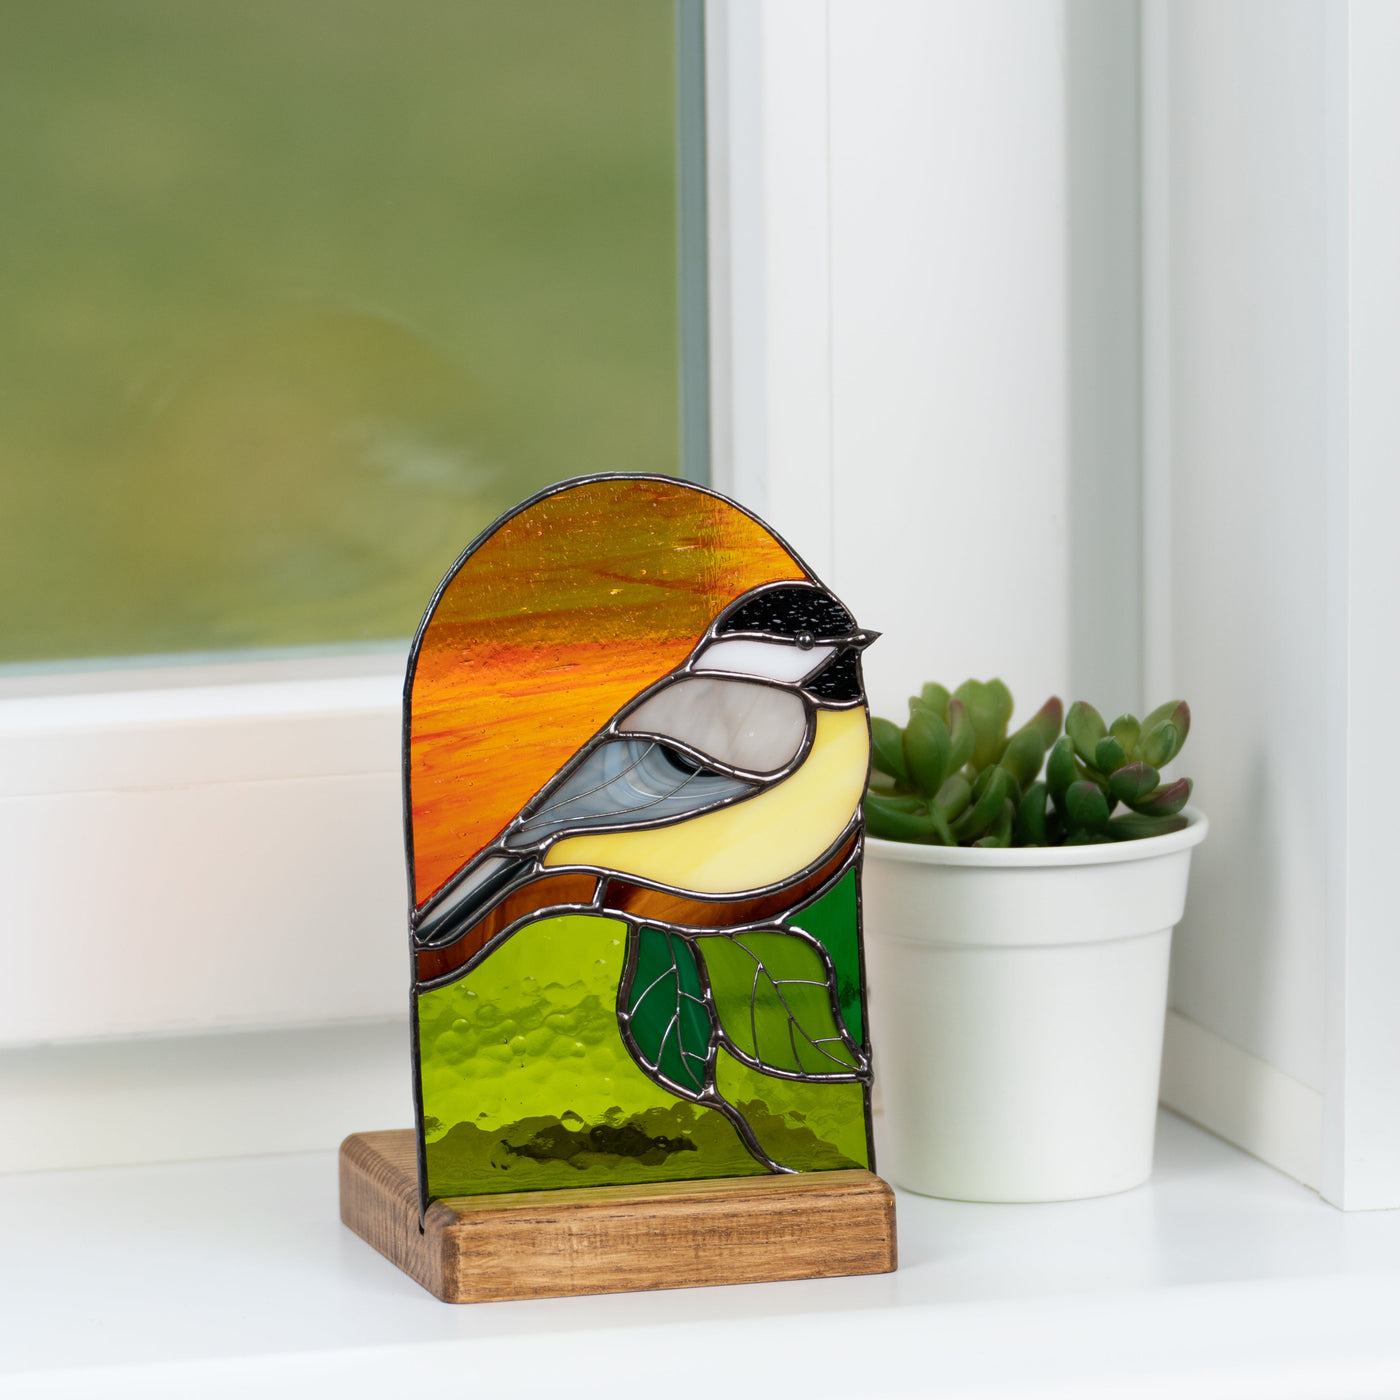 Wooden-based stained glass panel depicting a chickadee